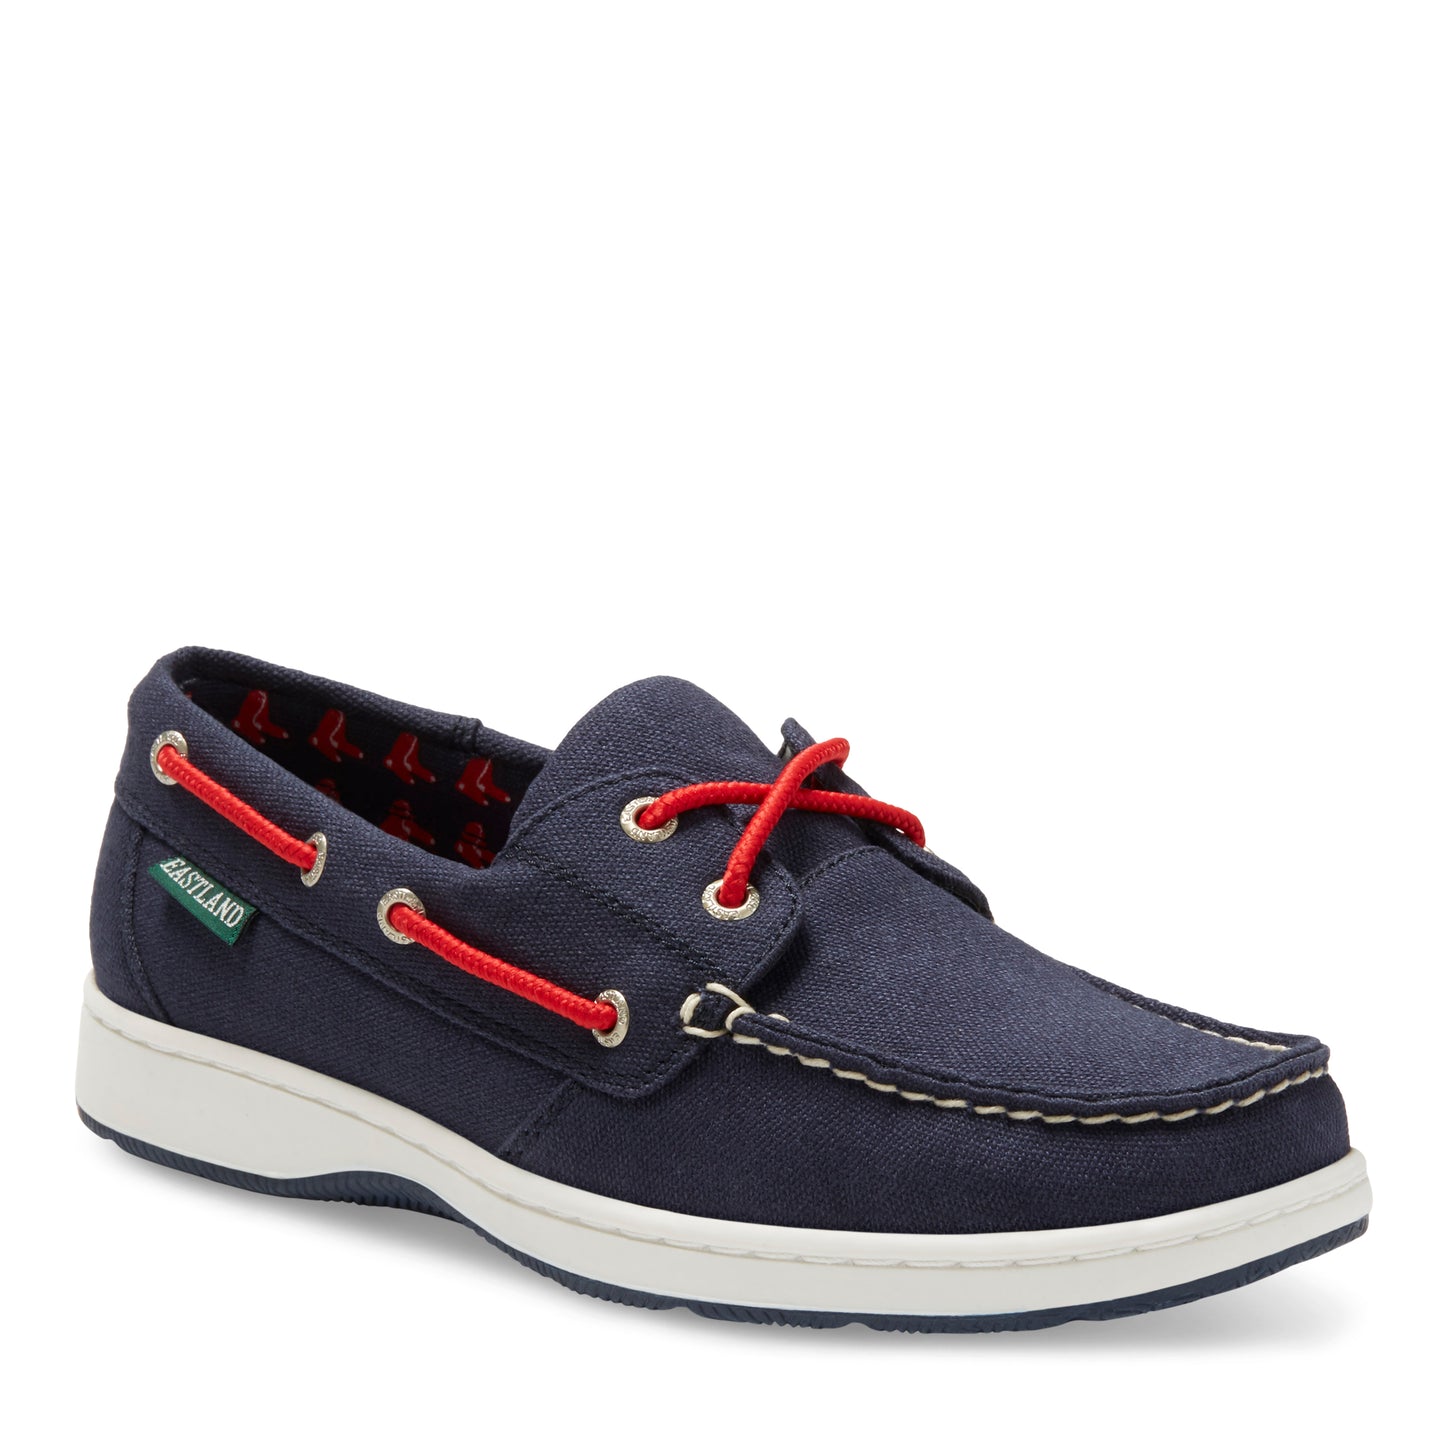 Women's Solstice MLB Boston Red Sox Canvas Boat Shoe